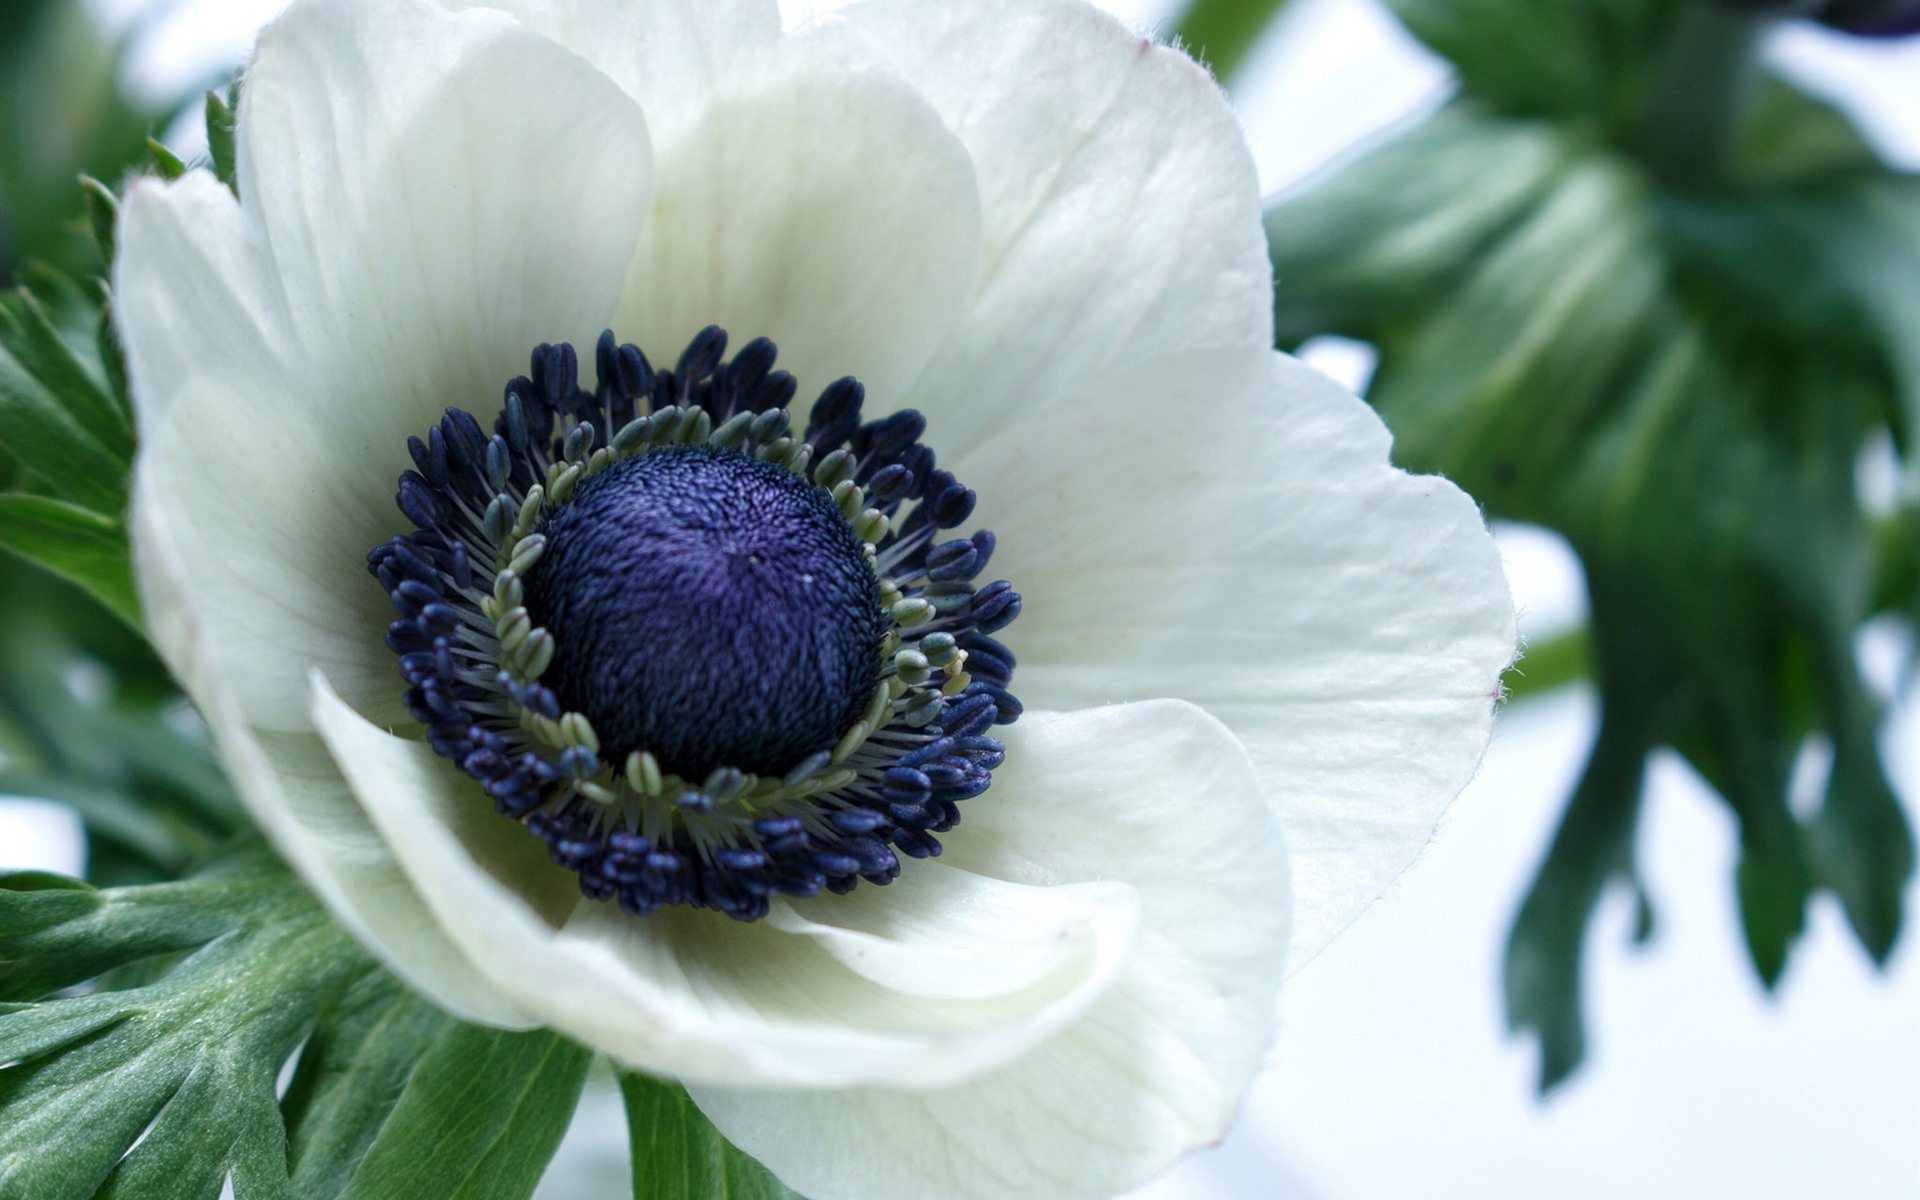 White anemone flower macro photography x iphone s wallpaper background picture image